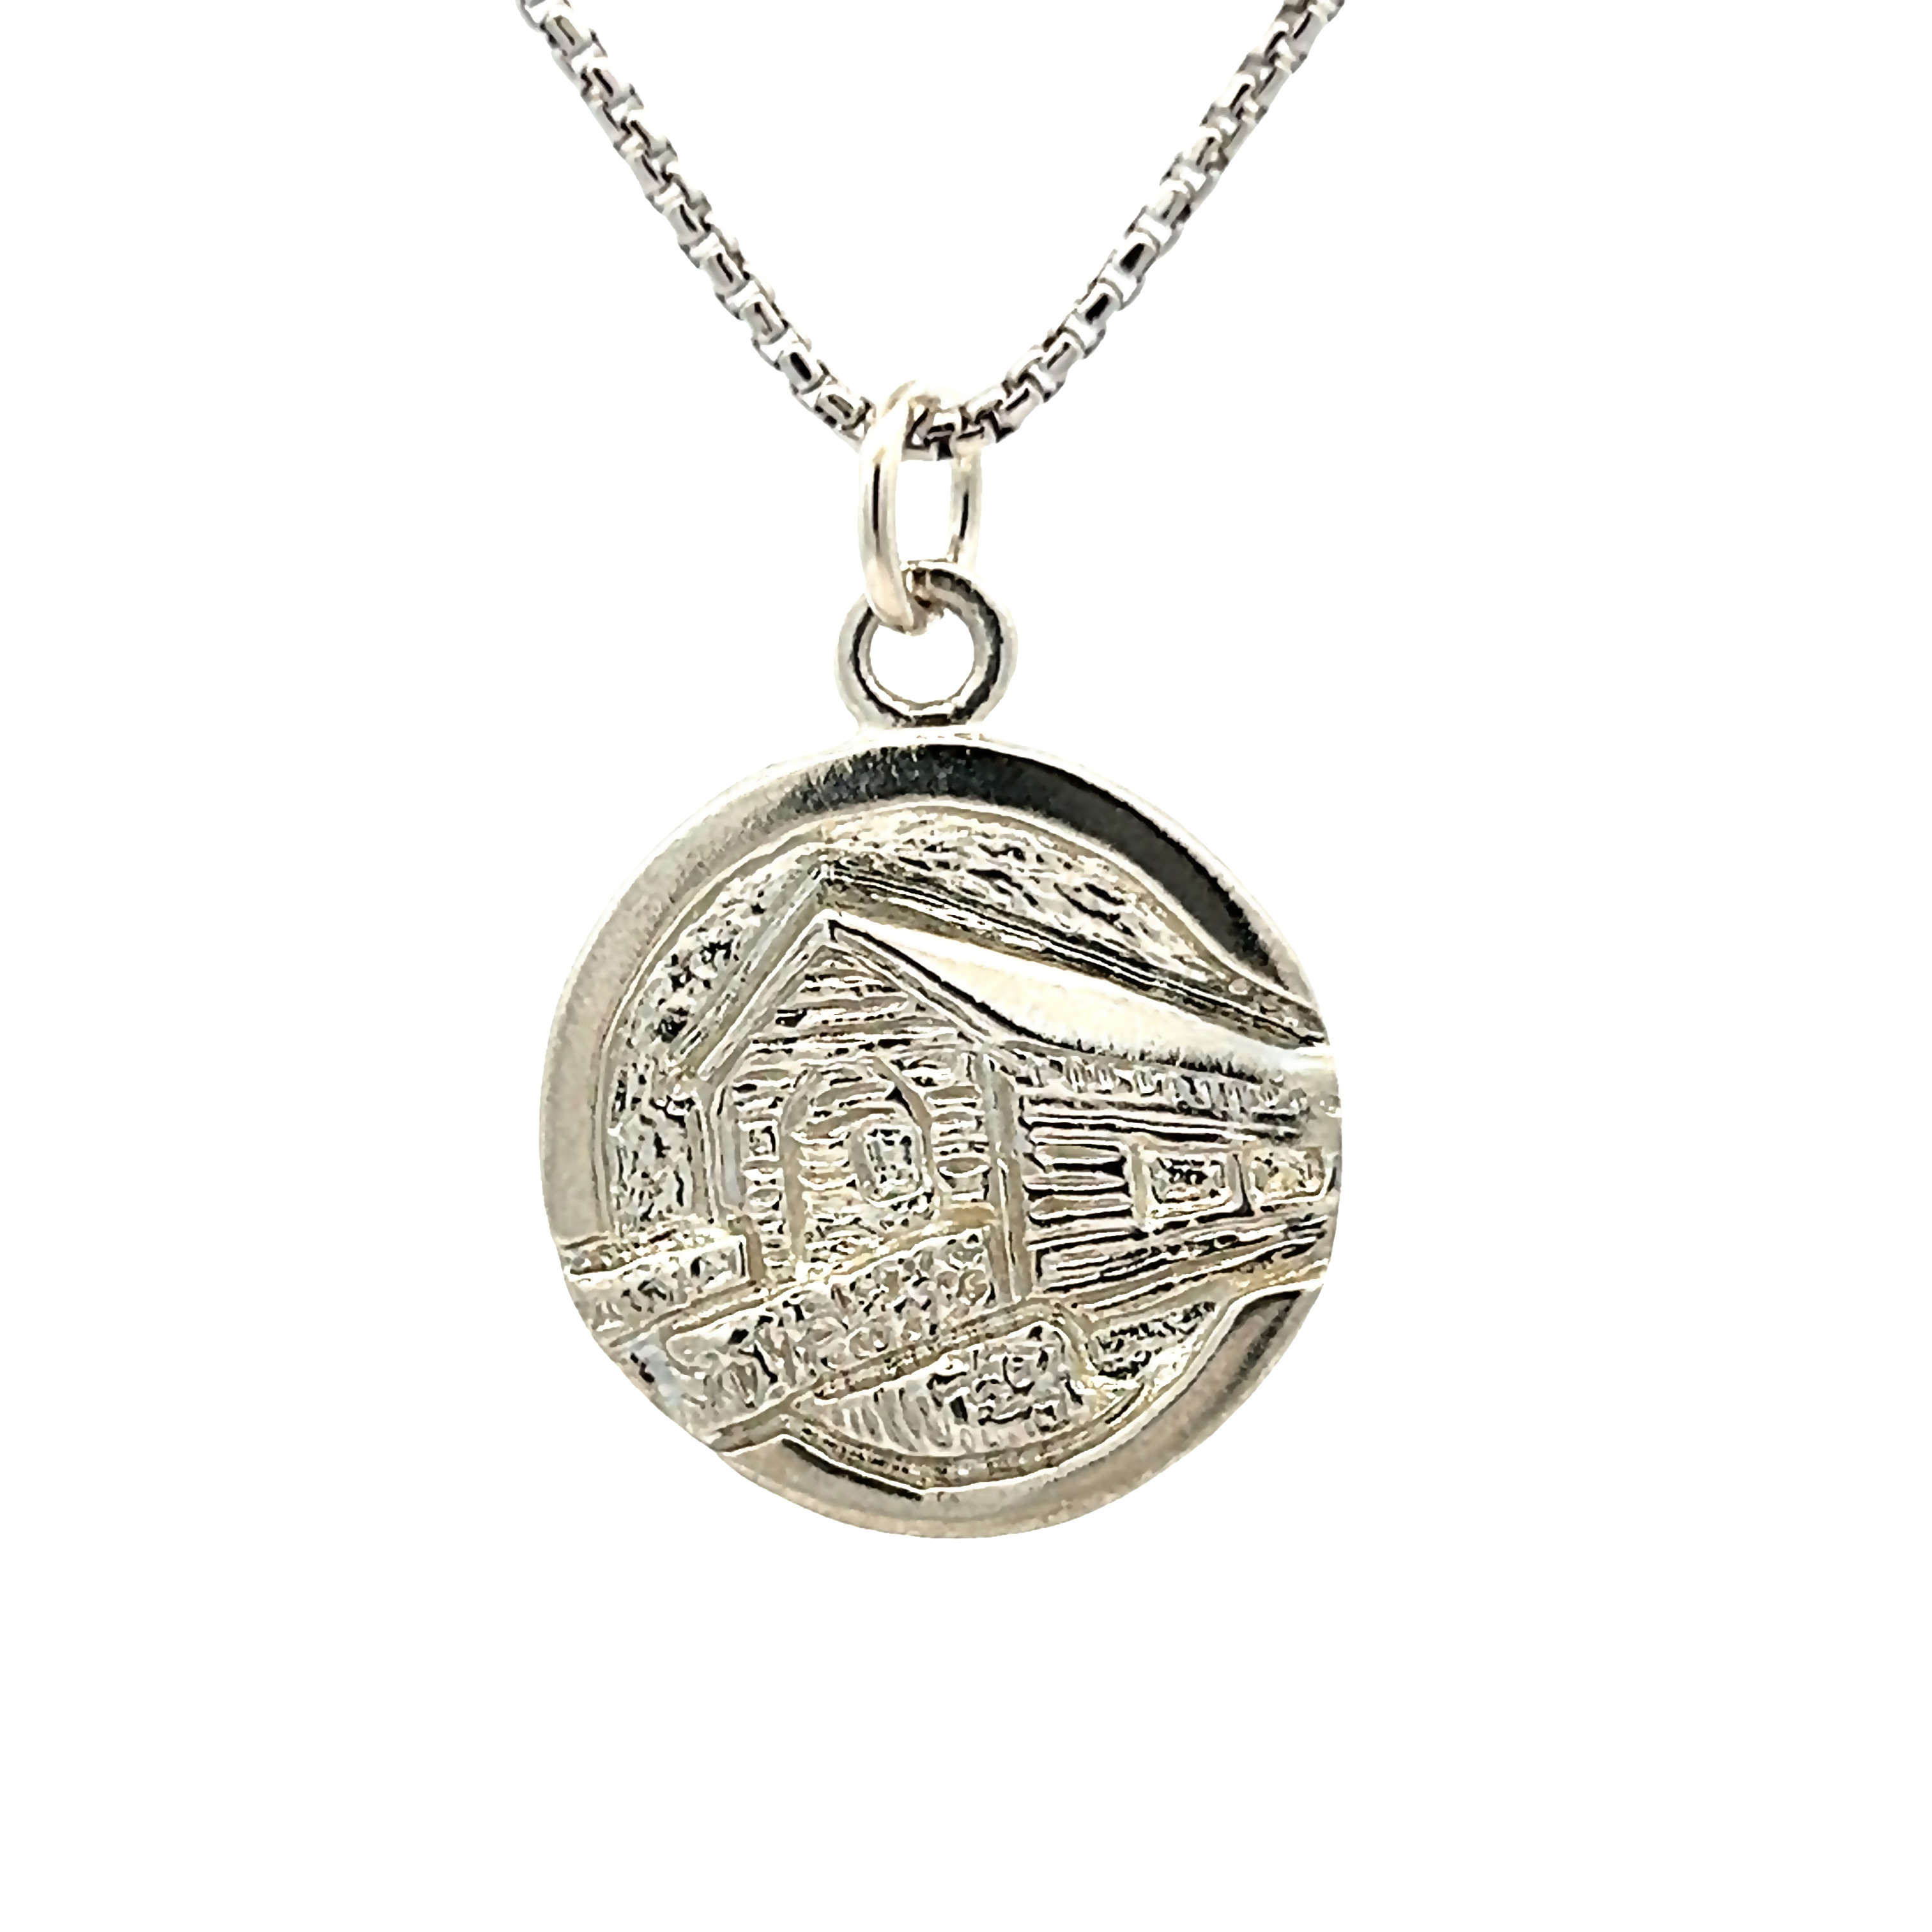 Sterling Silver Covered Bridge Charm